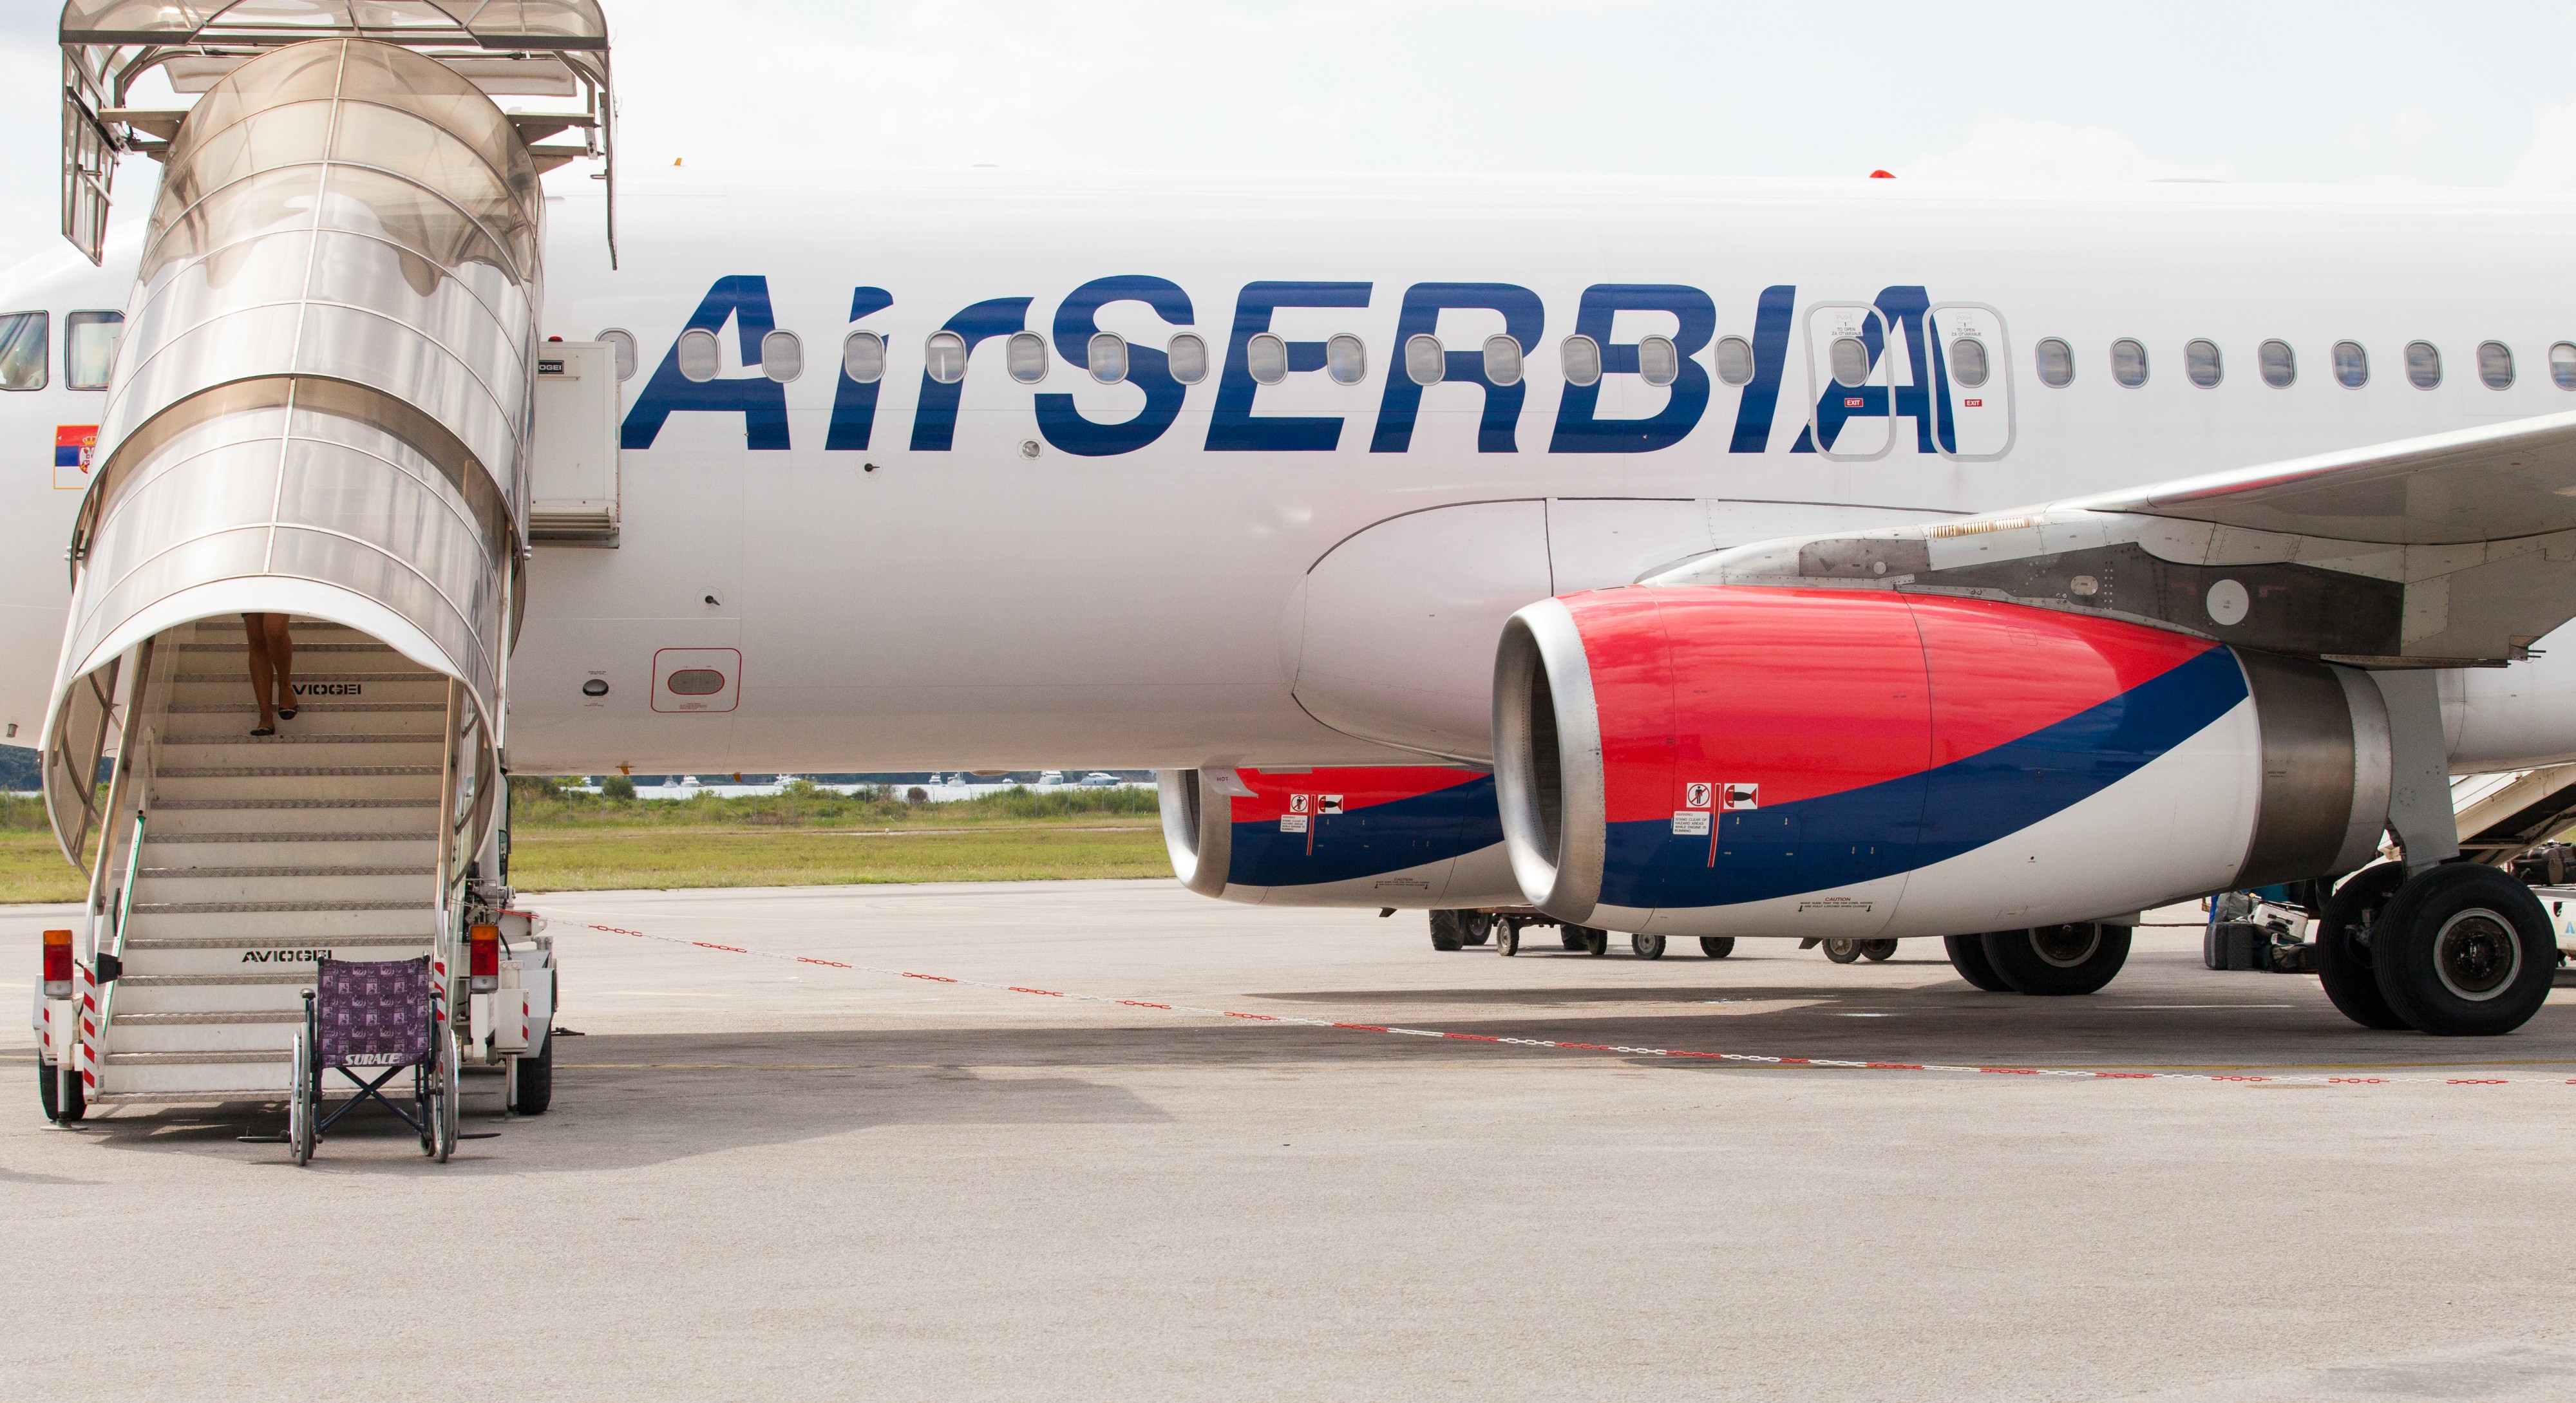 an Air Serbia airplane photographed in Tivat, Montenegro in August 2014, picture 2